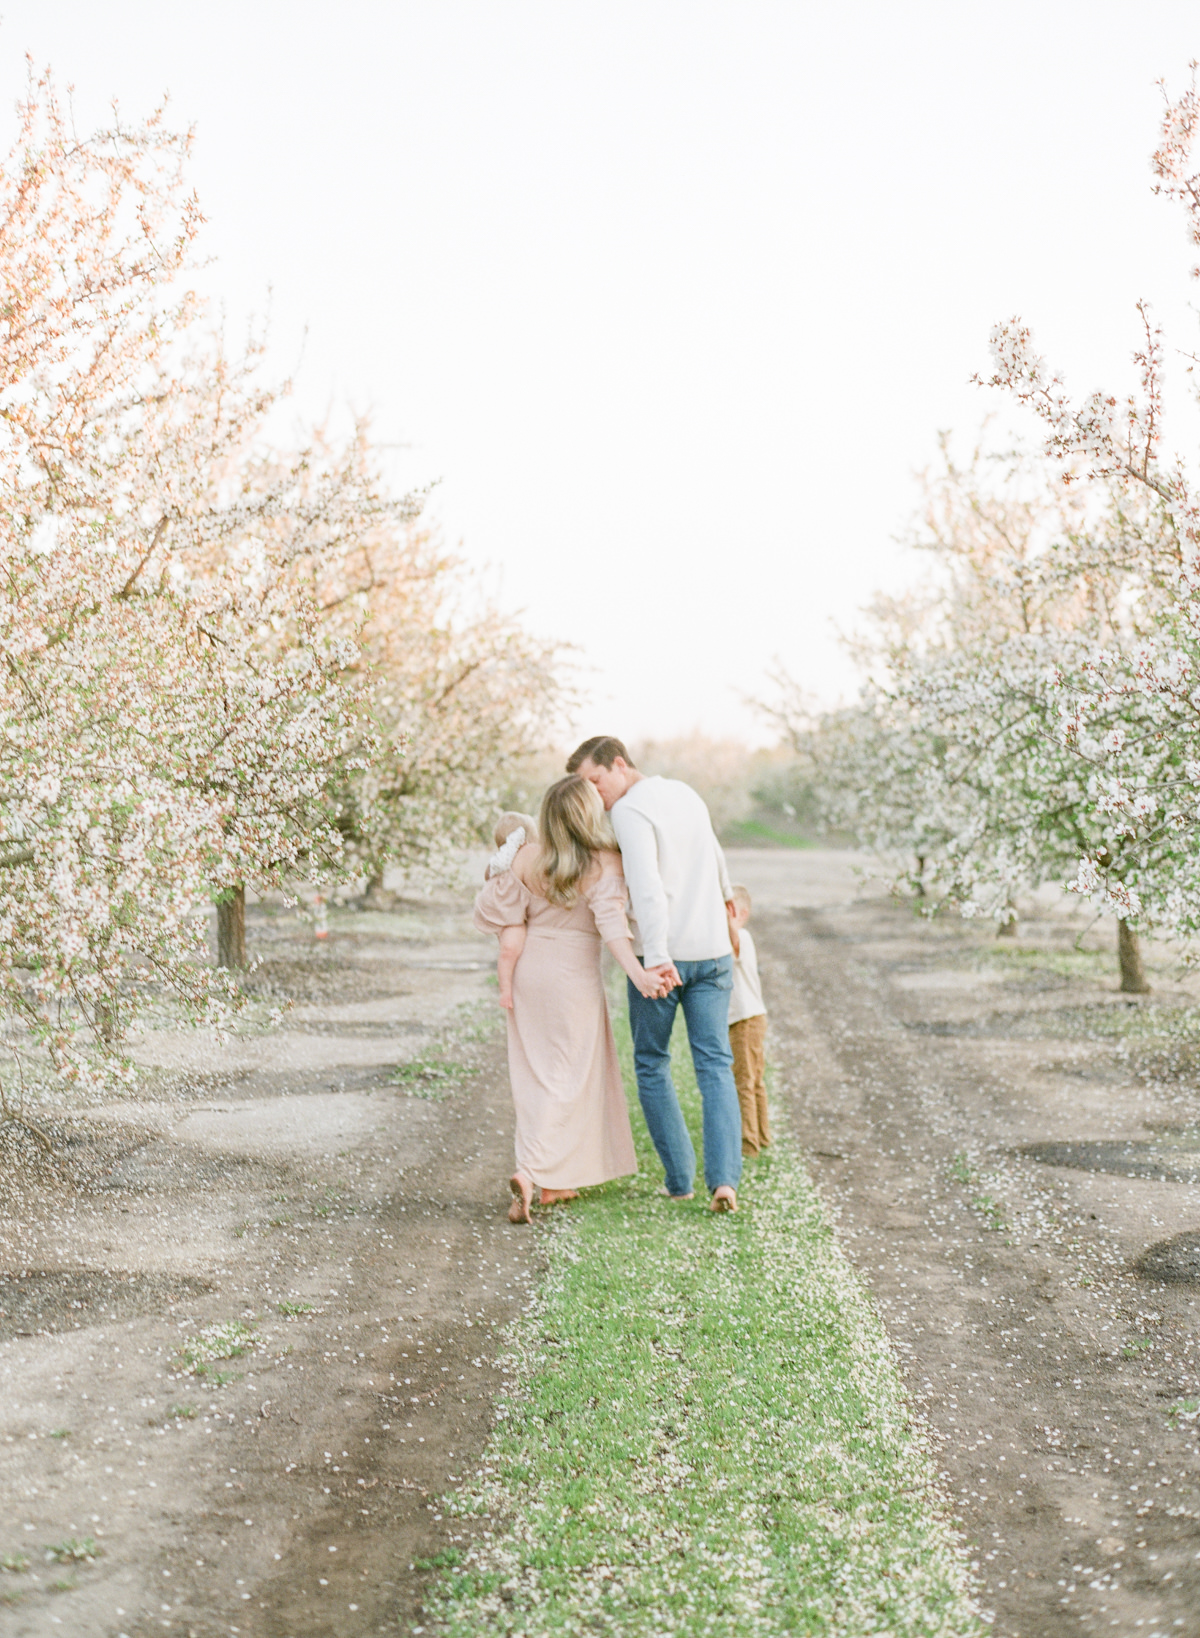 Central Valley Family Session, Almond Grove, Family Photography on Film, San Francisco Bay Area Family Film Photographer Kent Avenue Photography Light and Airy 30